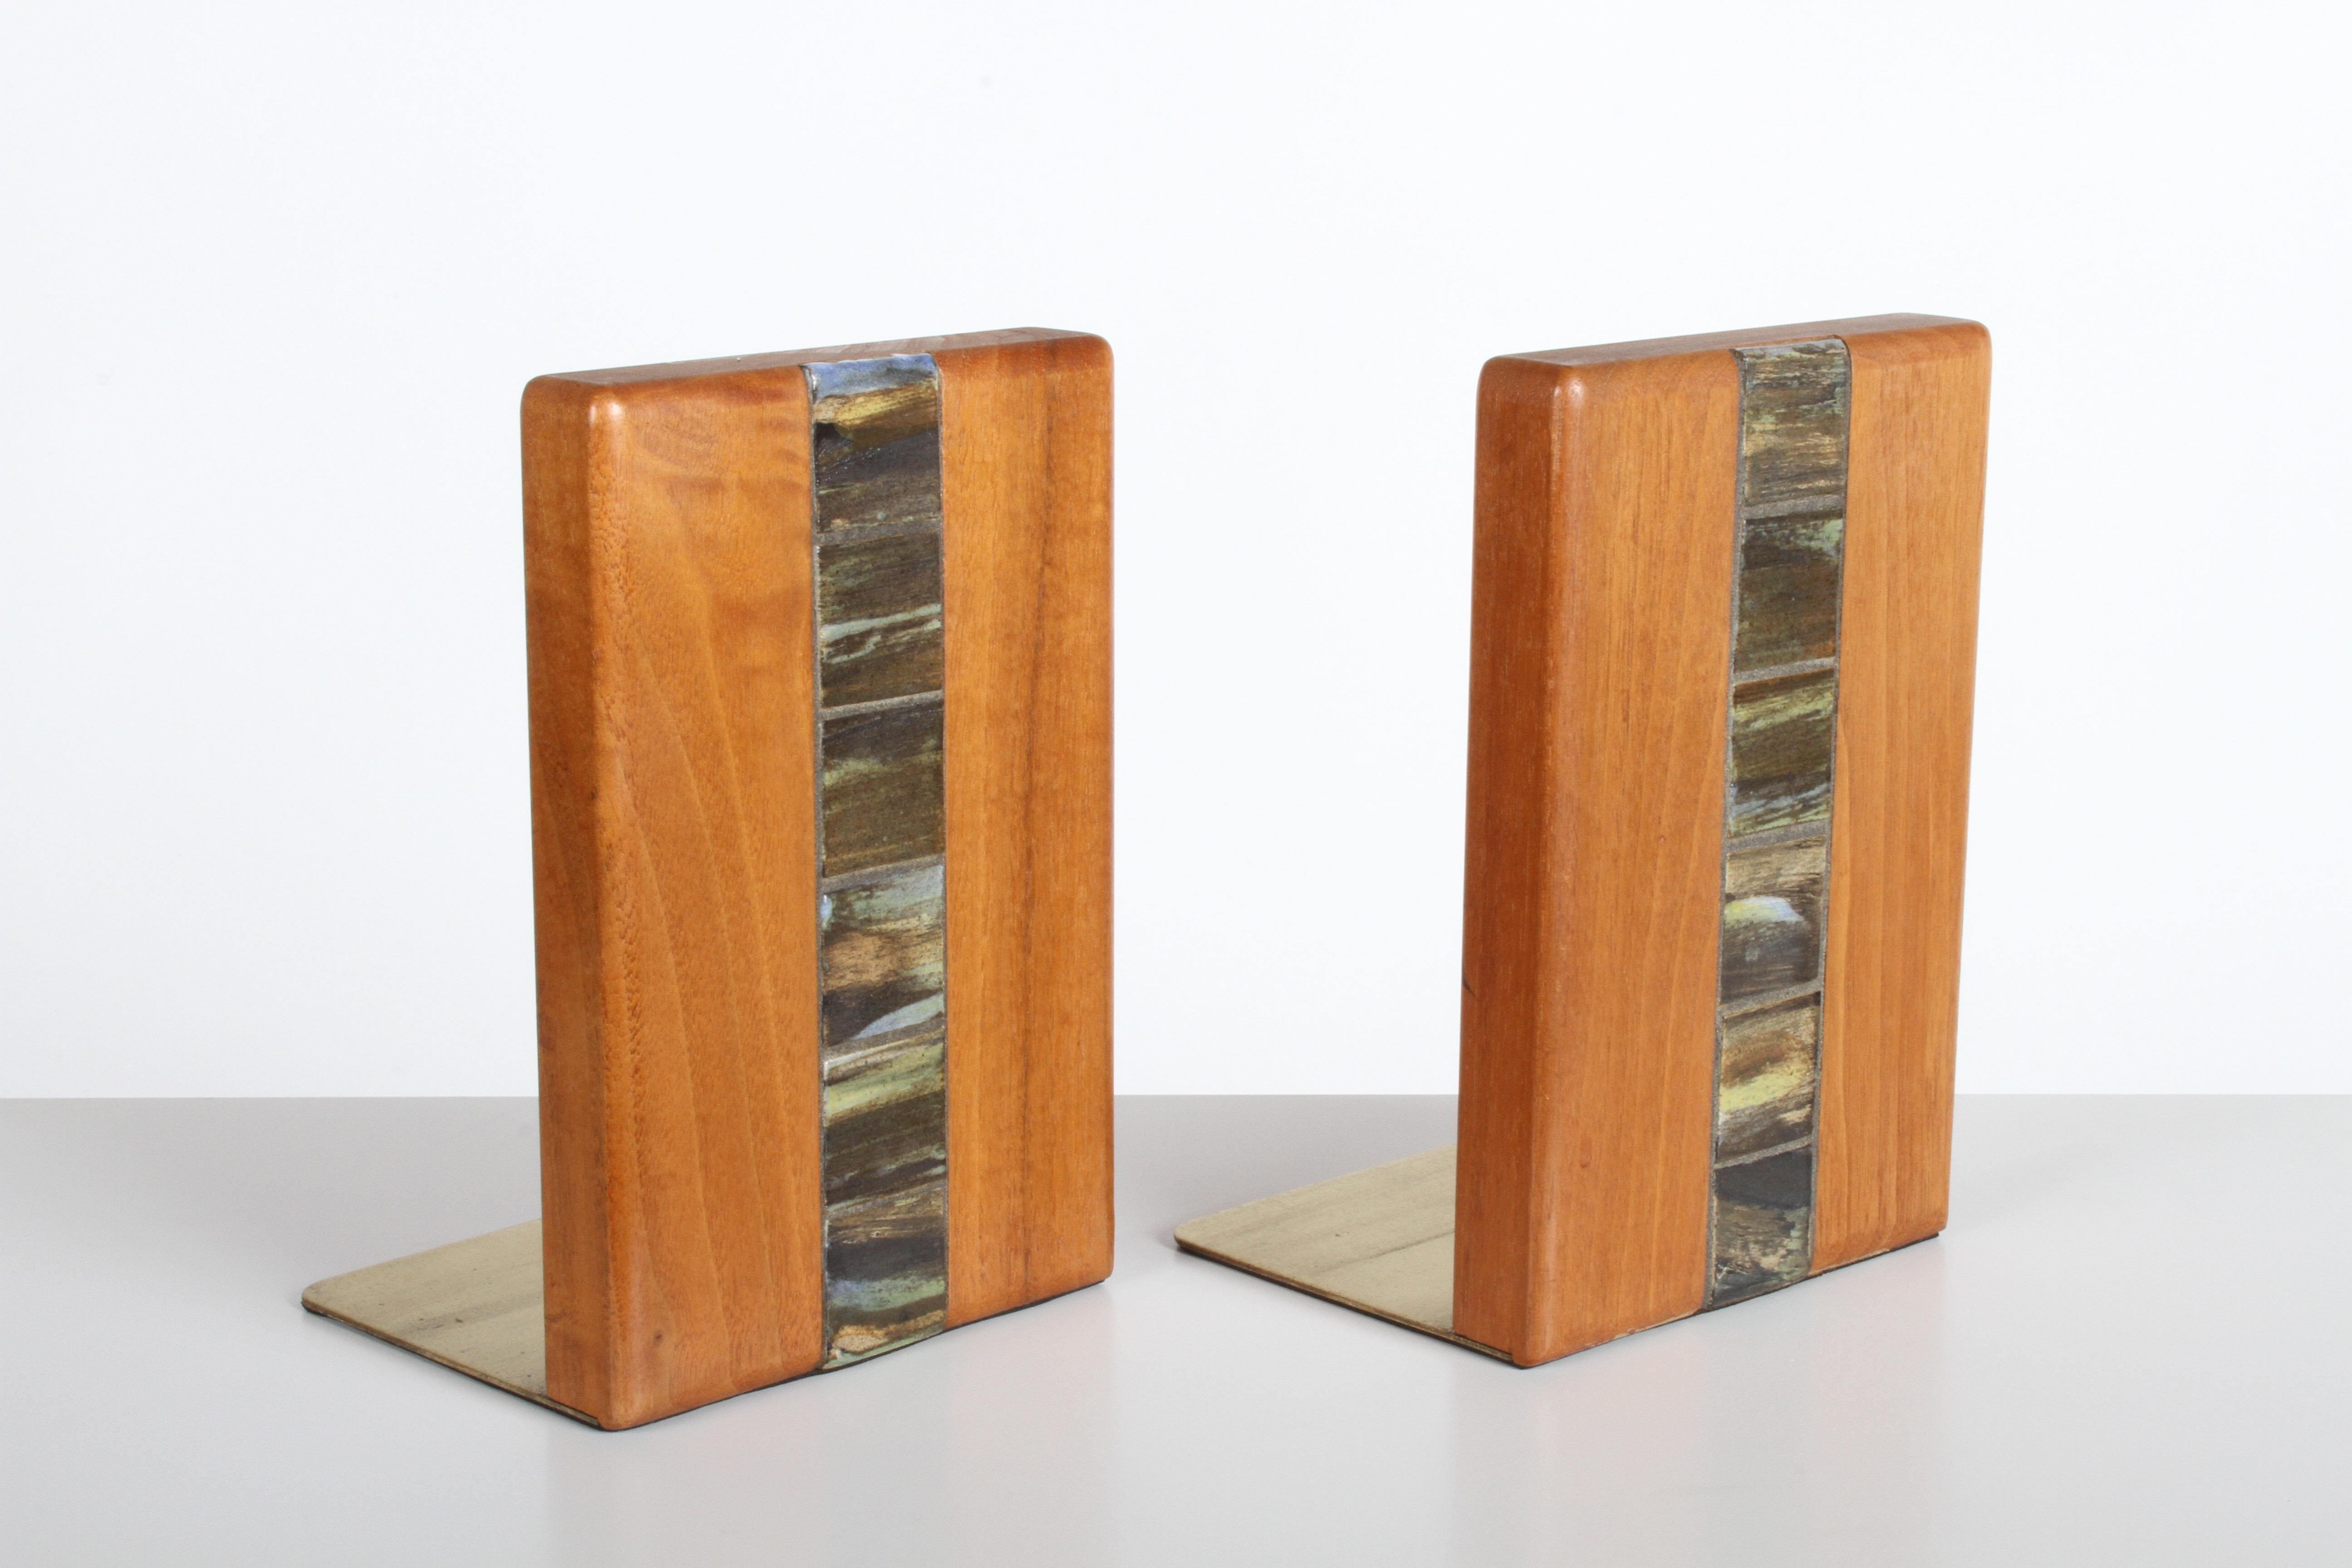 Pair of walnut bookends with inset tiles by Jane and Gordon Martz for Marshall Studios on brass bases. Model number WBER5-132. Very nice original condition, small water spot to one bookend top.